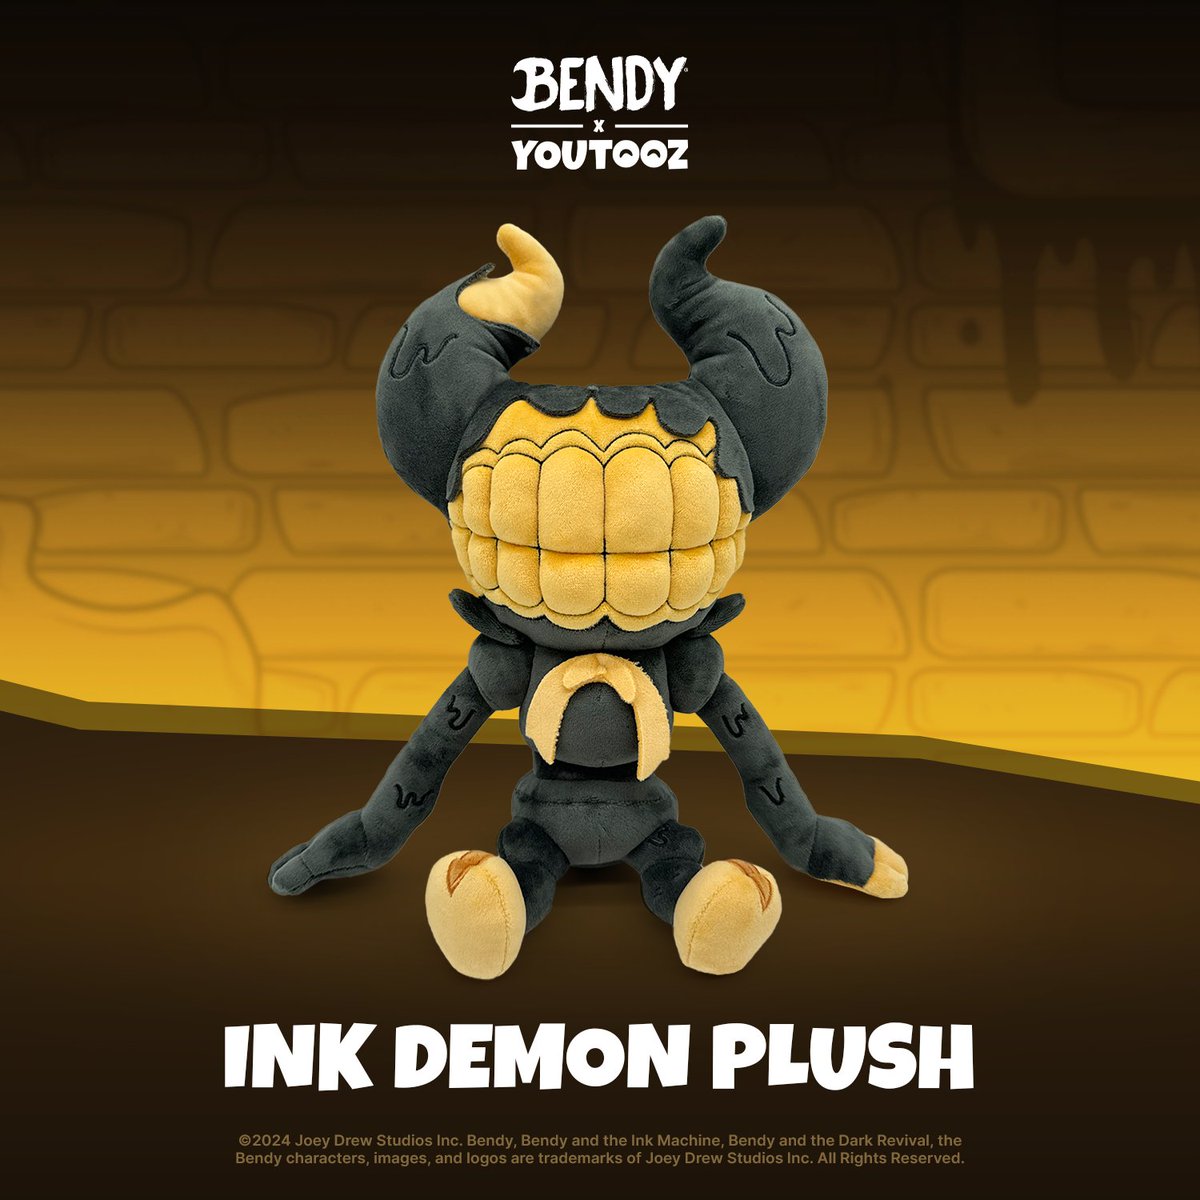 would u like to have a friend? 🎞🖤 all new @bendy plushies drop jan 12th ✒️ look at boris